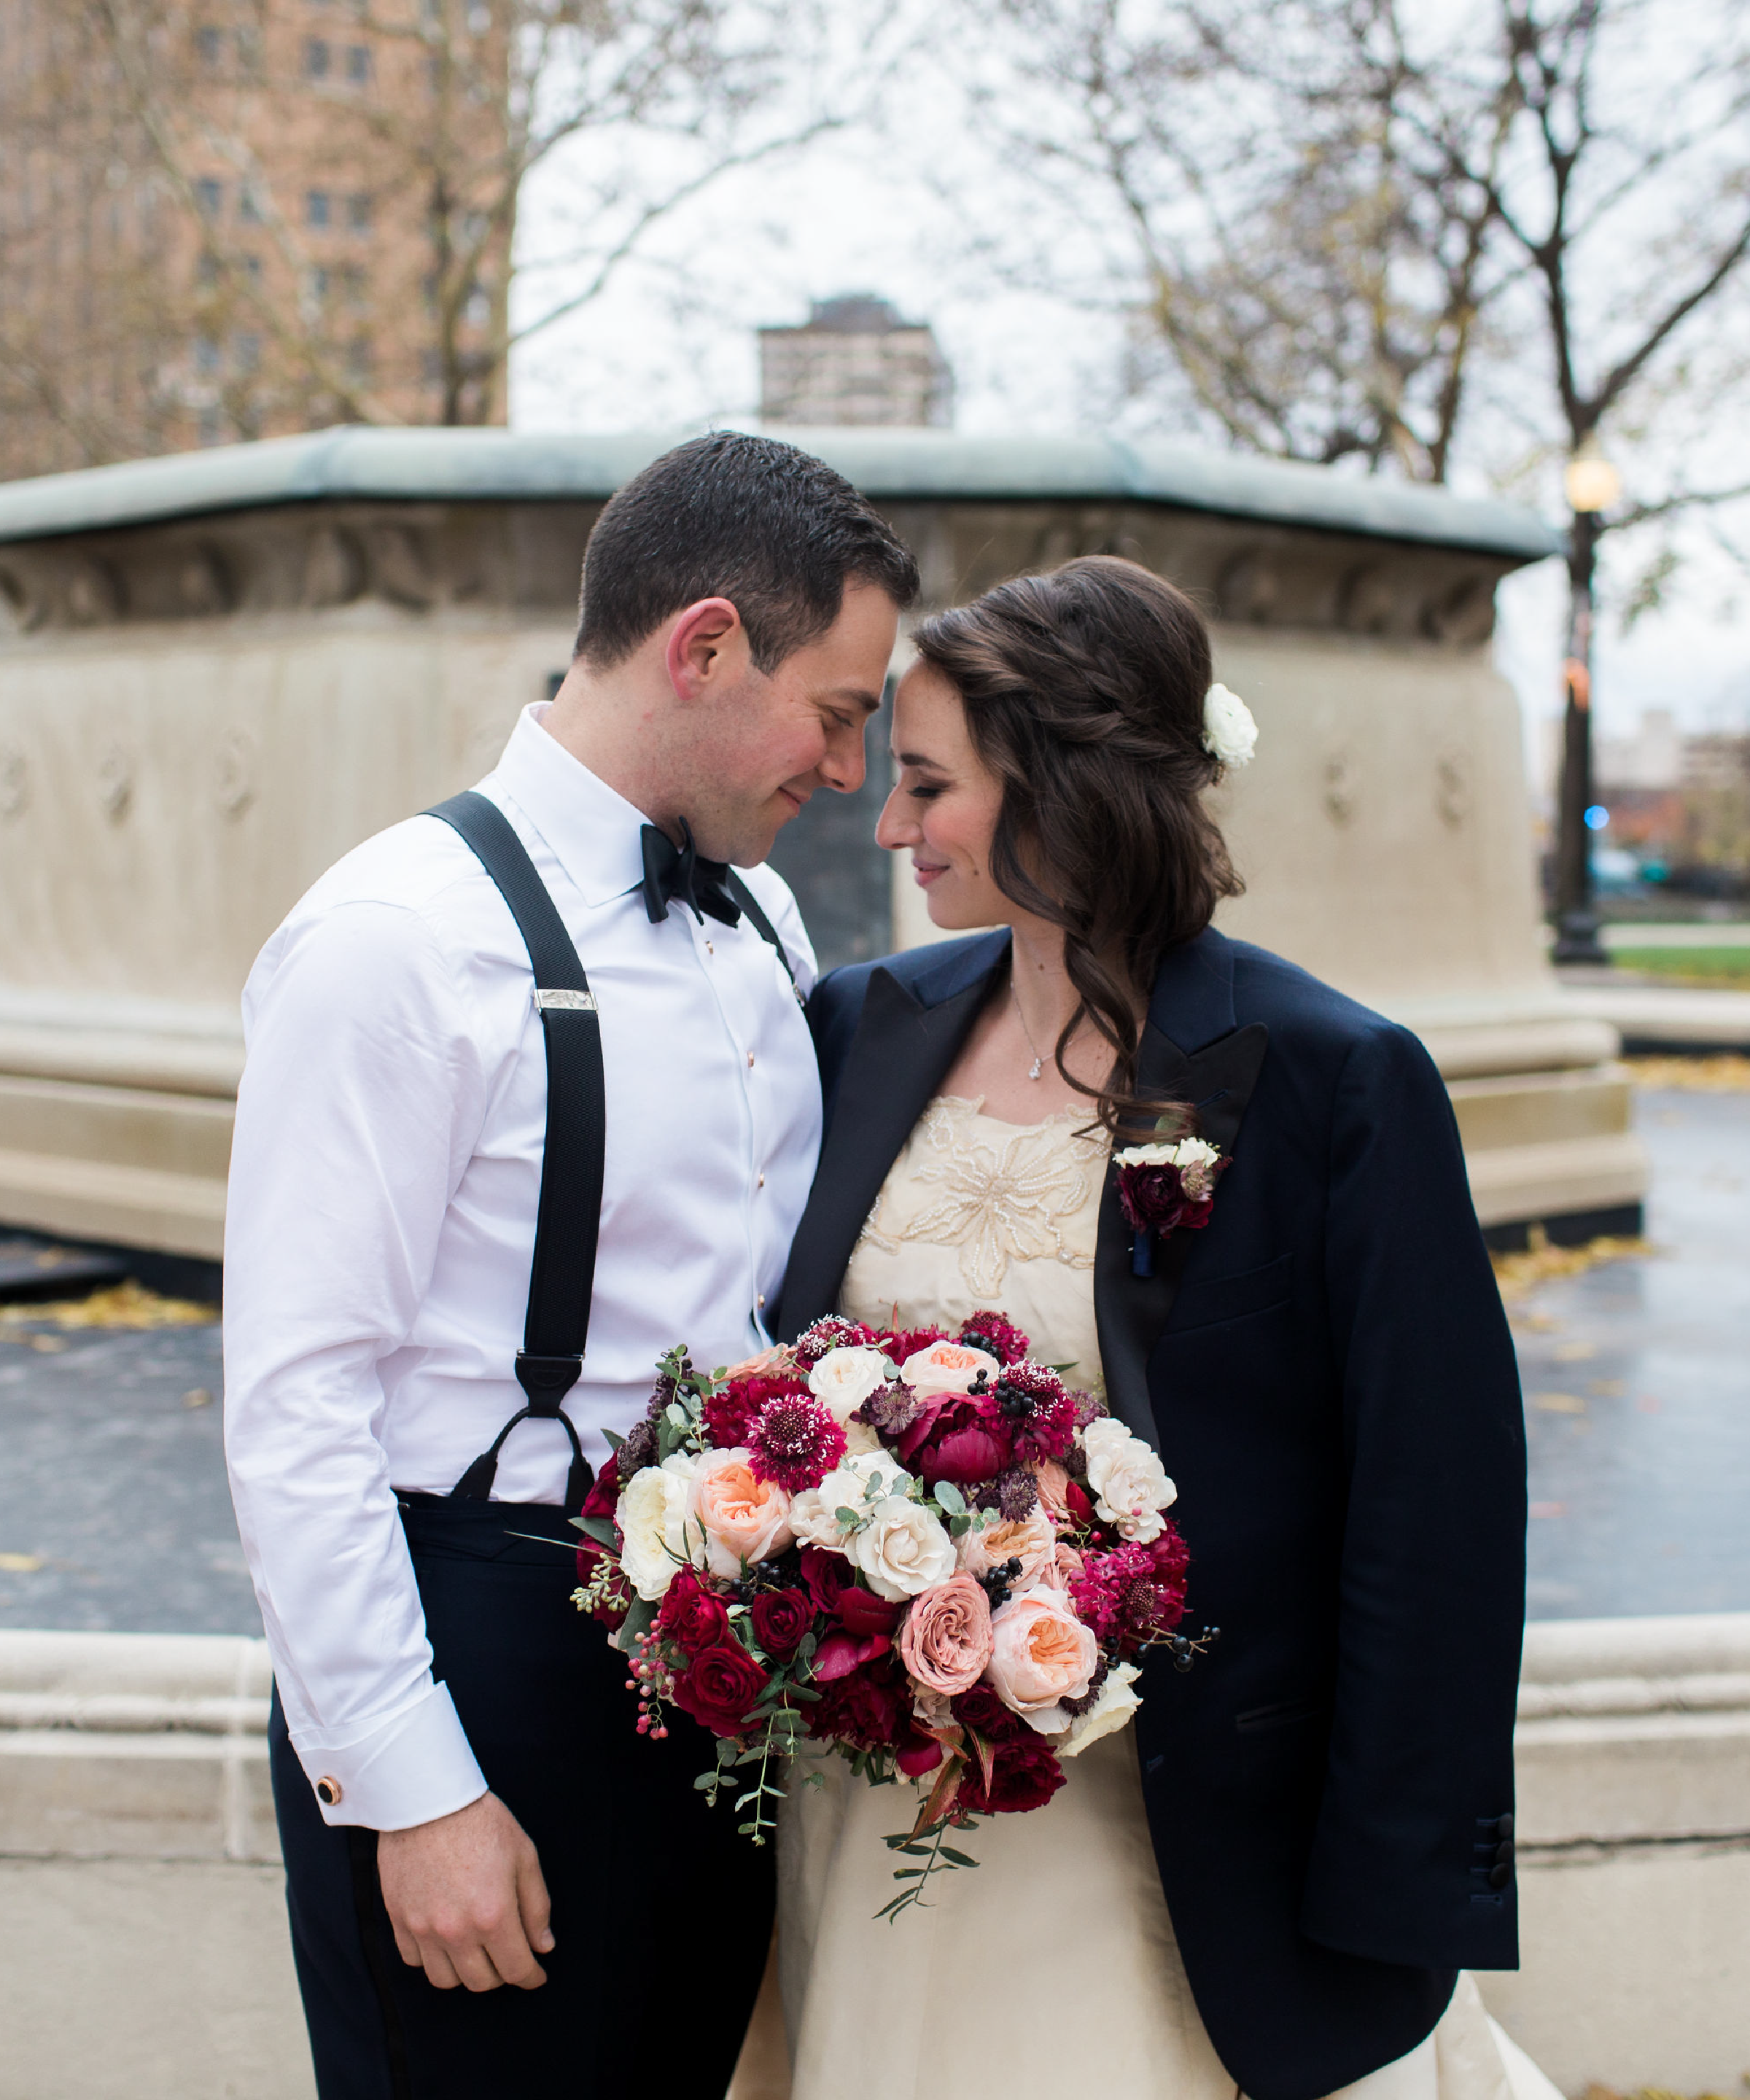 Detroit artist Leah Sachs and husband Adam on their wedding day | Photo: Casey Brodley